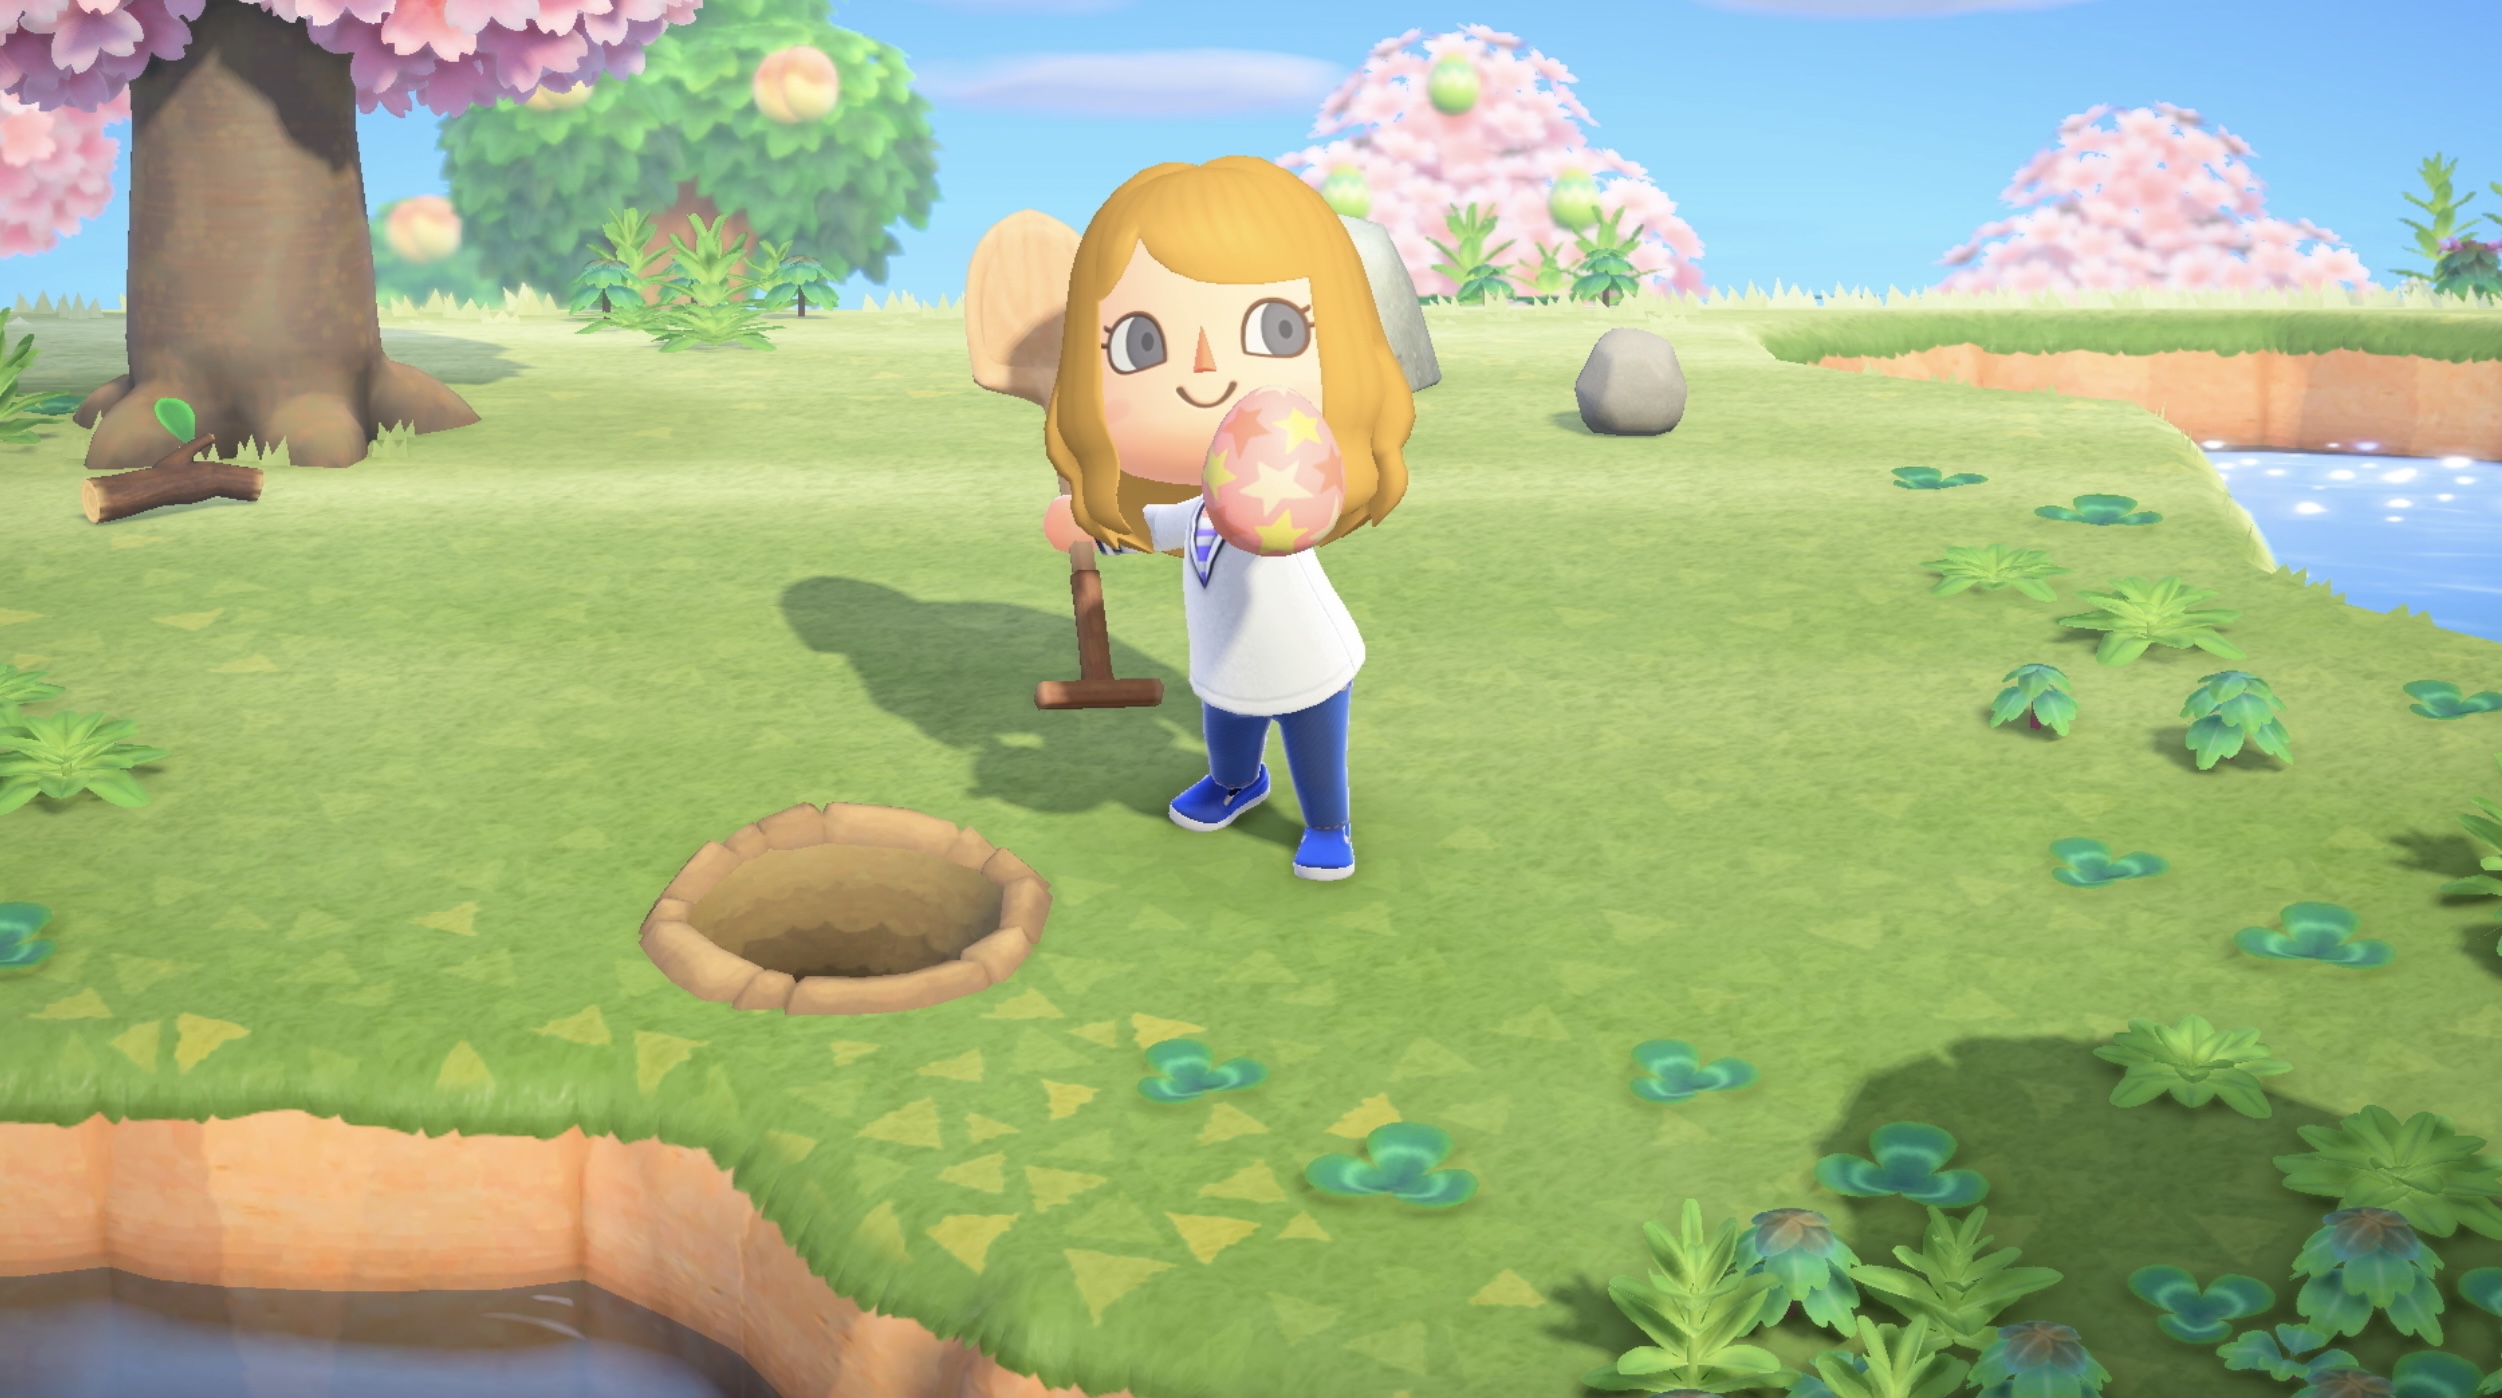 How To Get Water Eggs in Animal Crossing